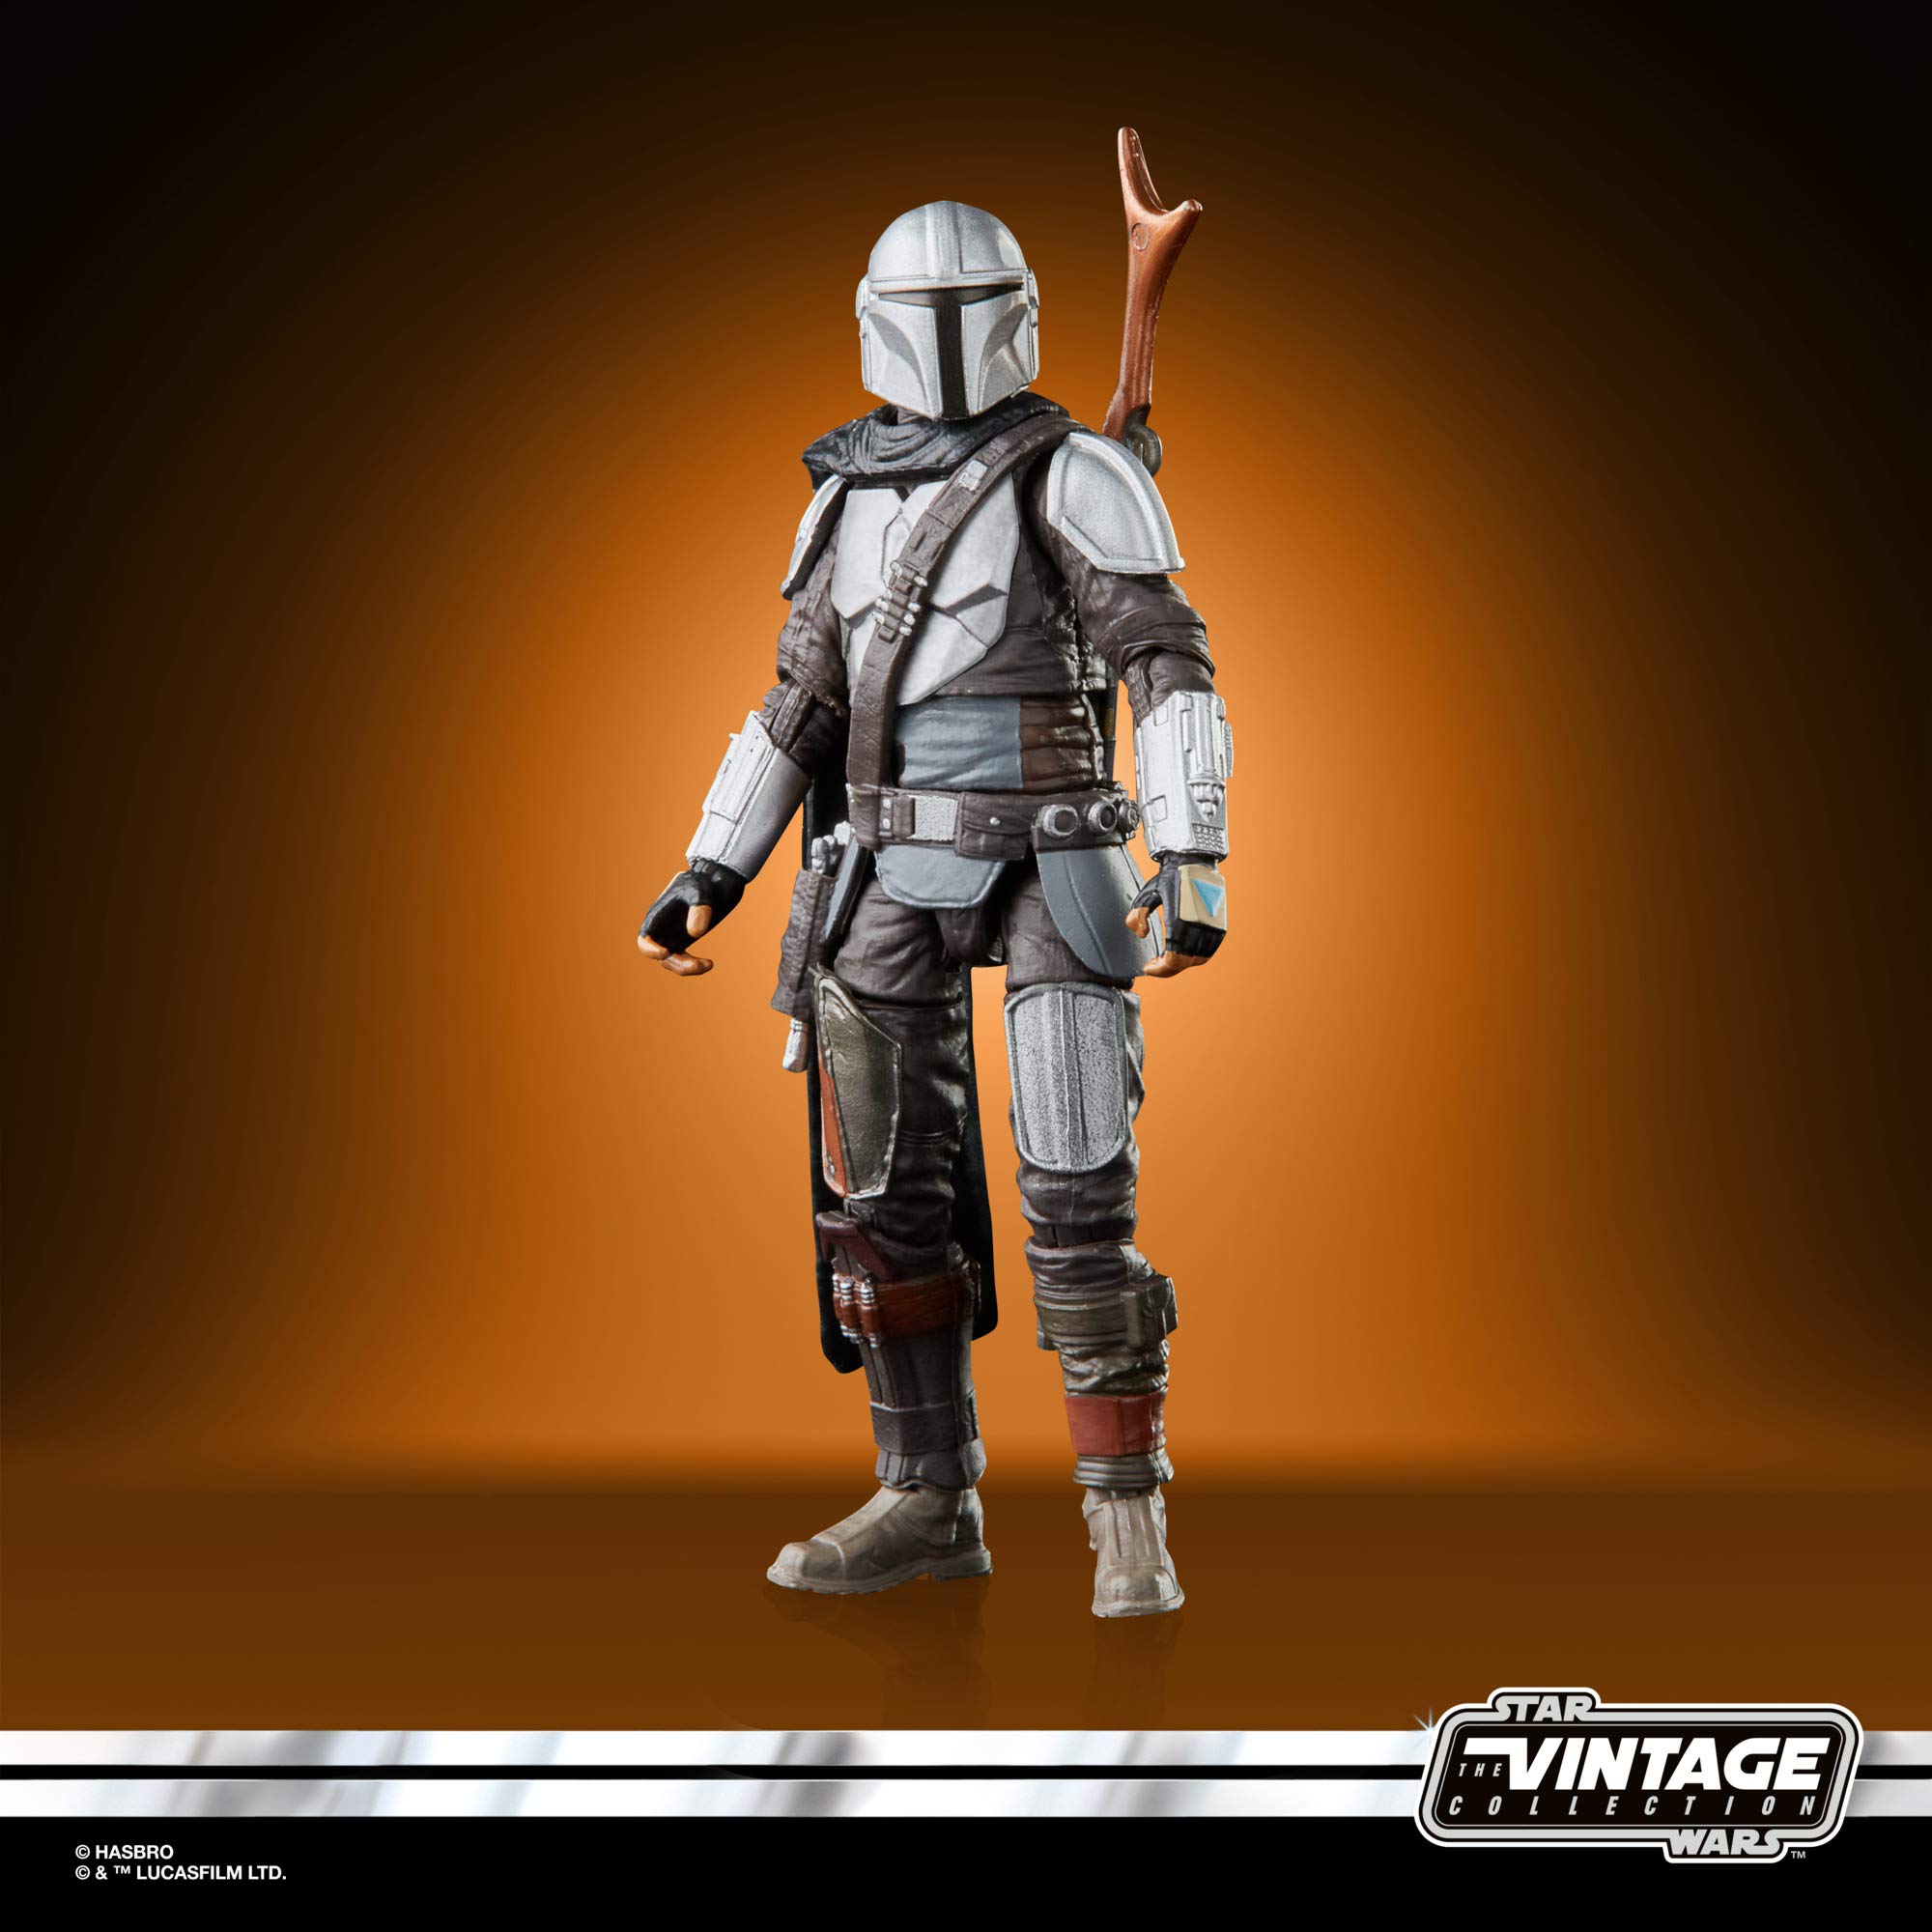 STAR WARS The Vintage Collection The Mandalorian Toy, 3.75-Inch-Scale The Mandalorian Action Figure, Toys for Kids Ages 4 and Up